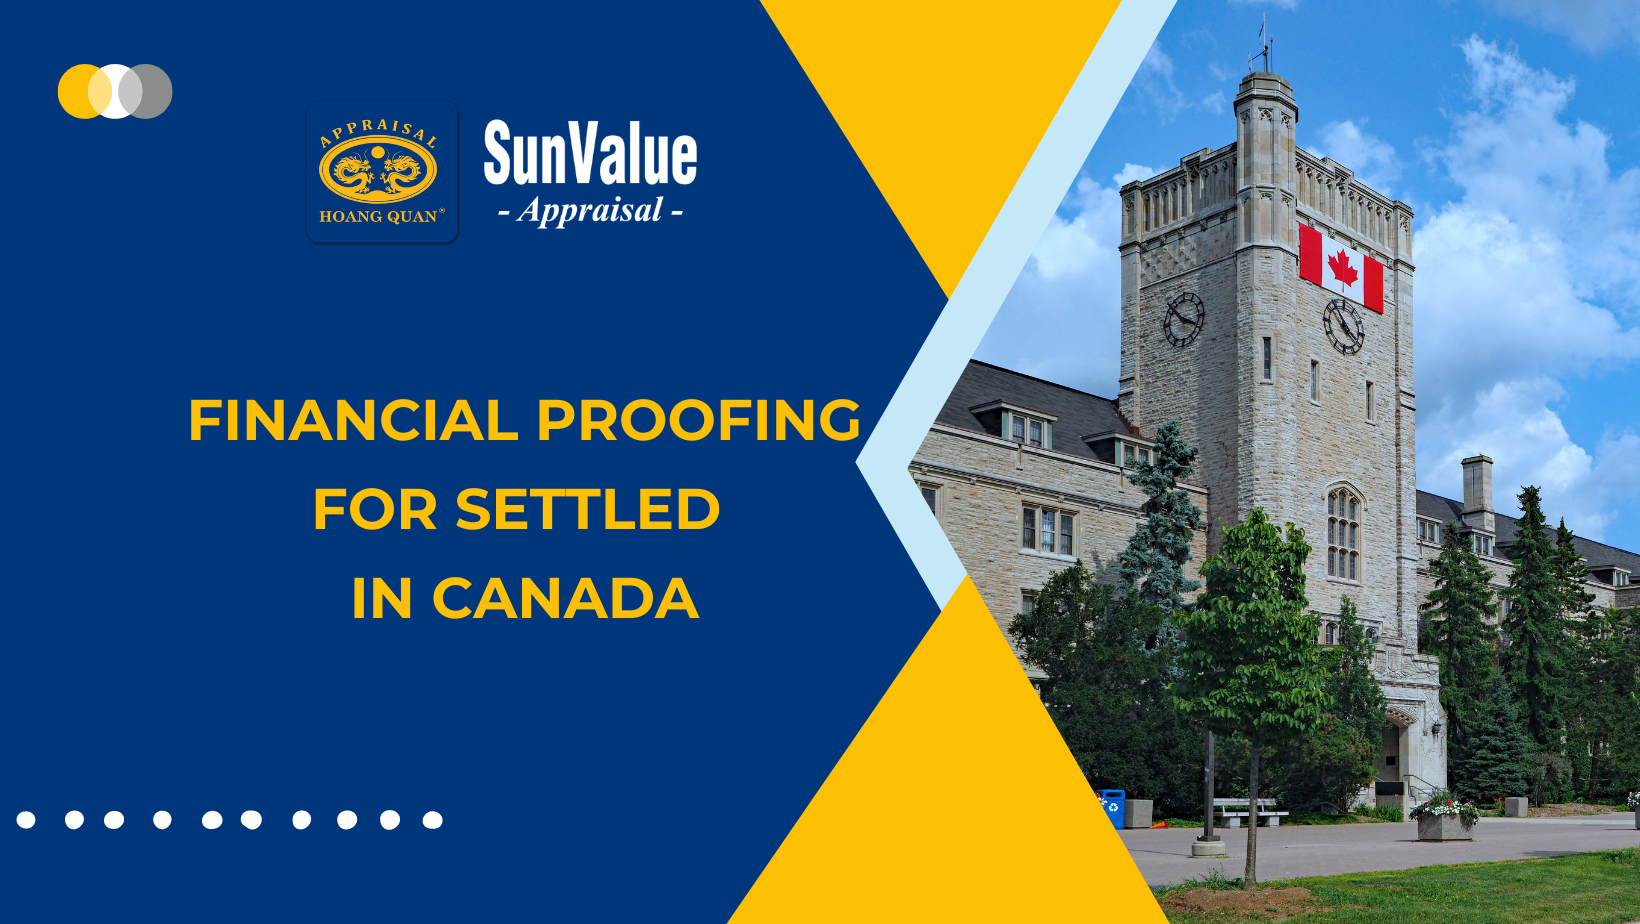 FINANCIAL PROOFING FOR SETTLED IN CANADA 2023